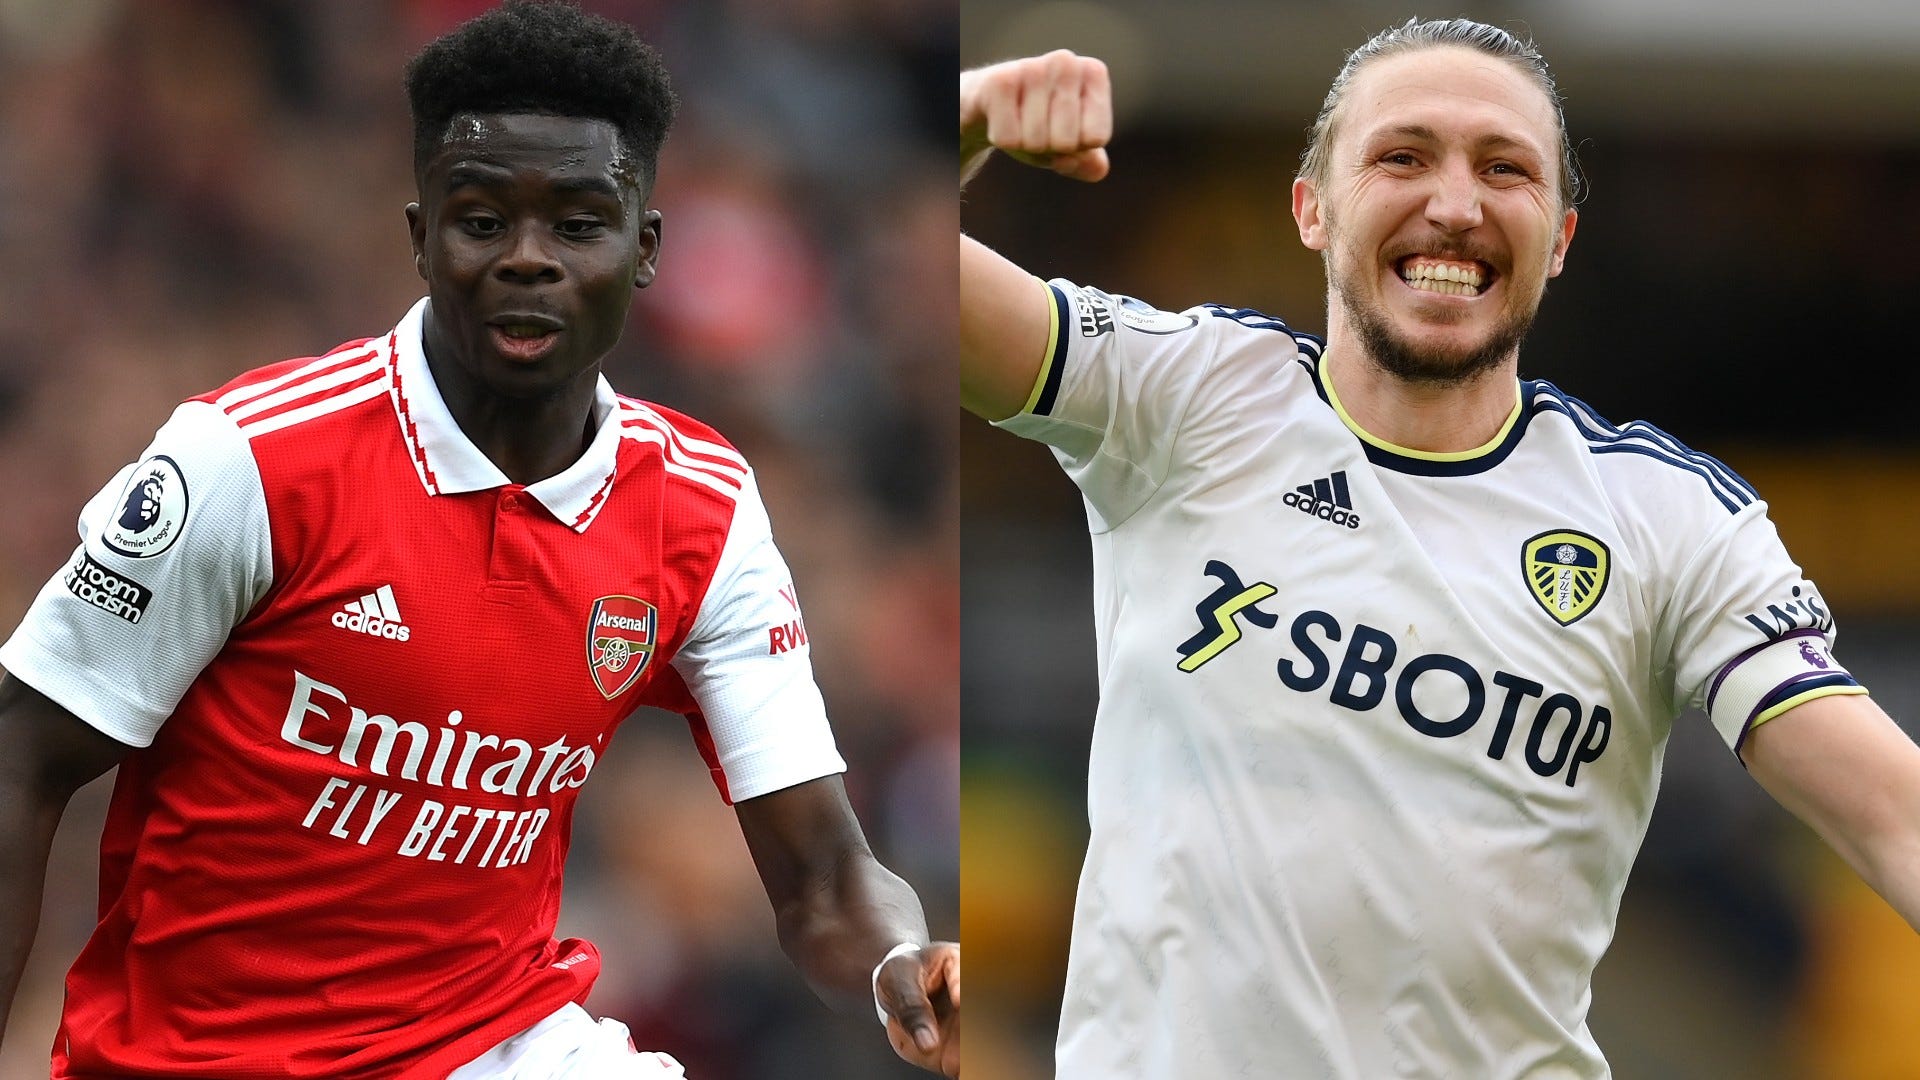 Arsenal vs Leeds United Where to watch the match online, live stream, TV channels and kick-off time Goal